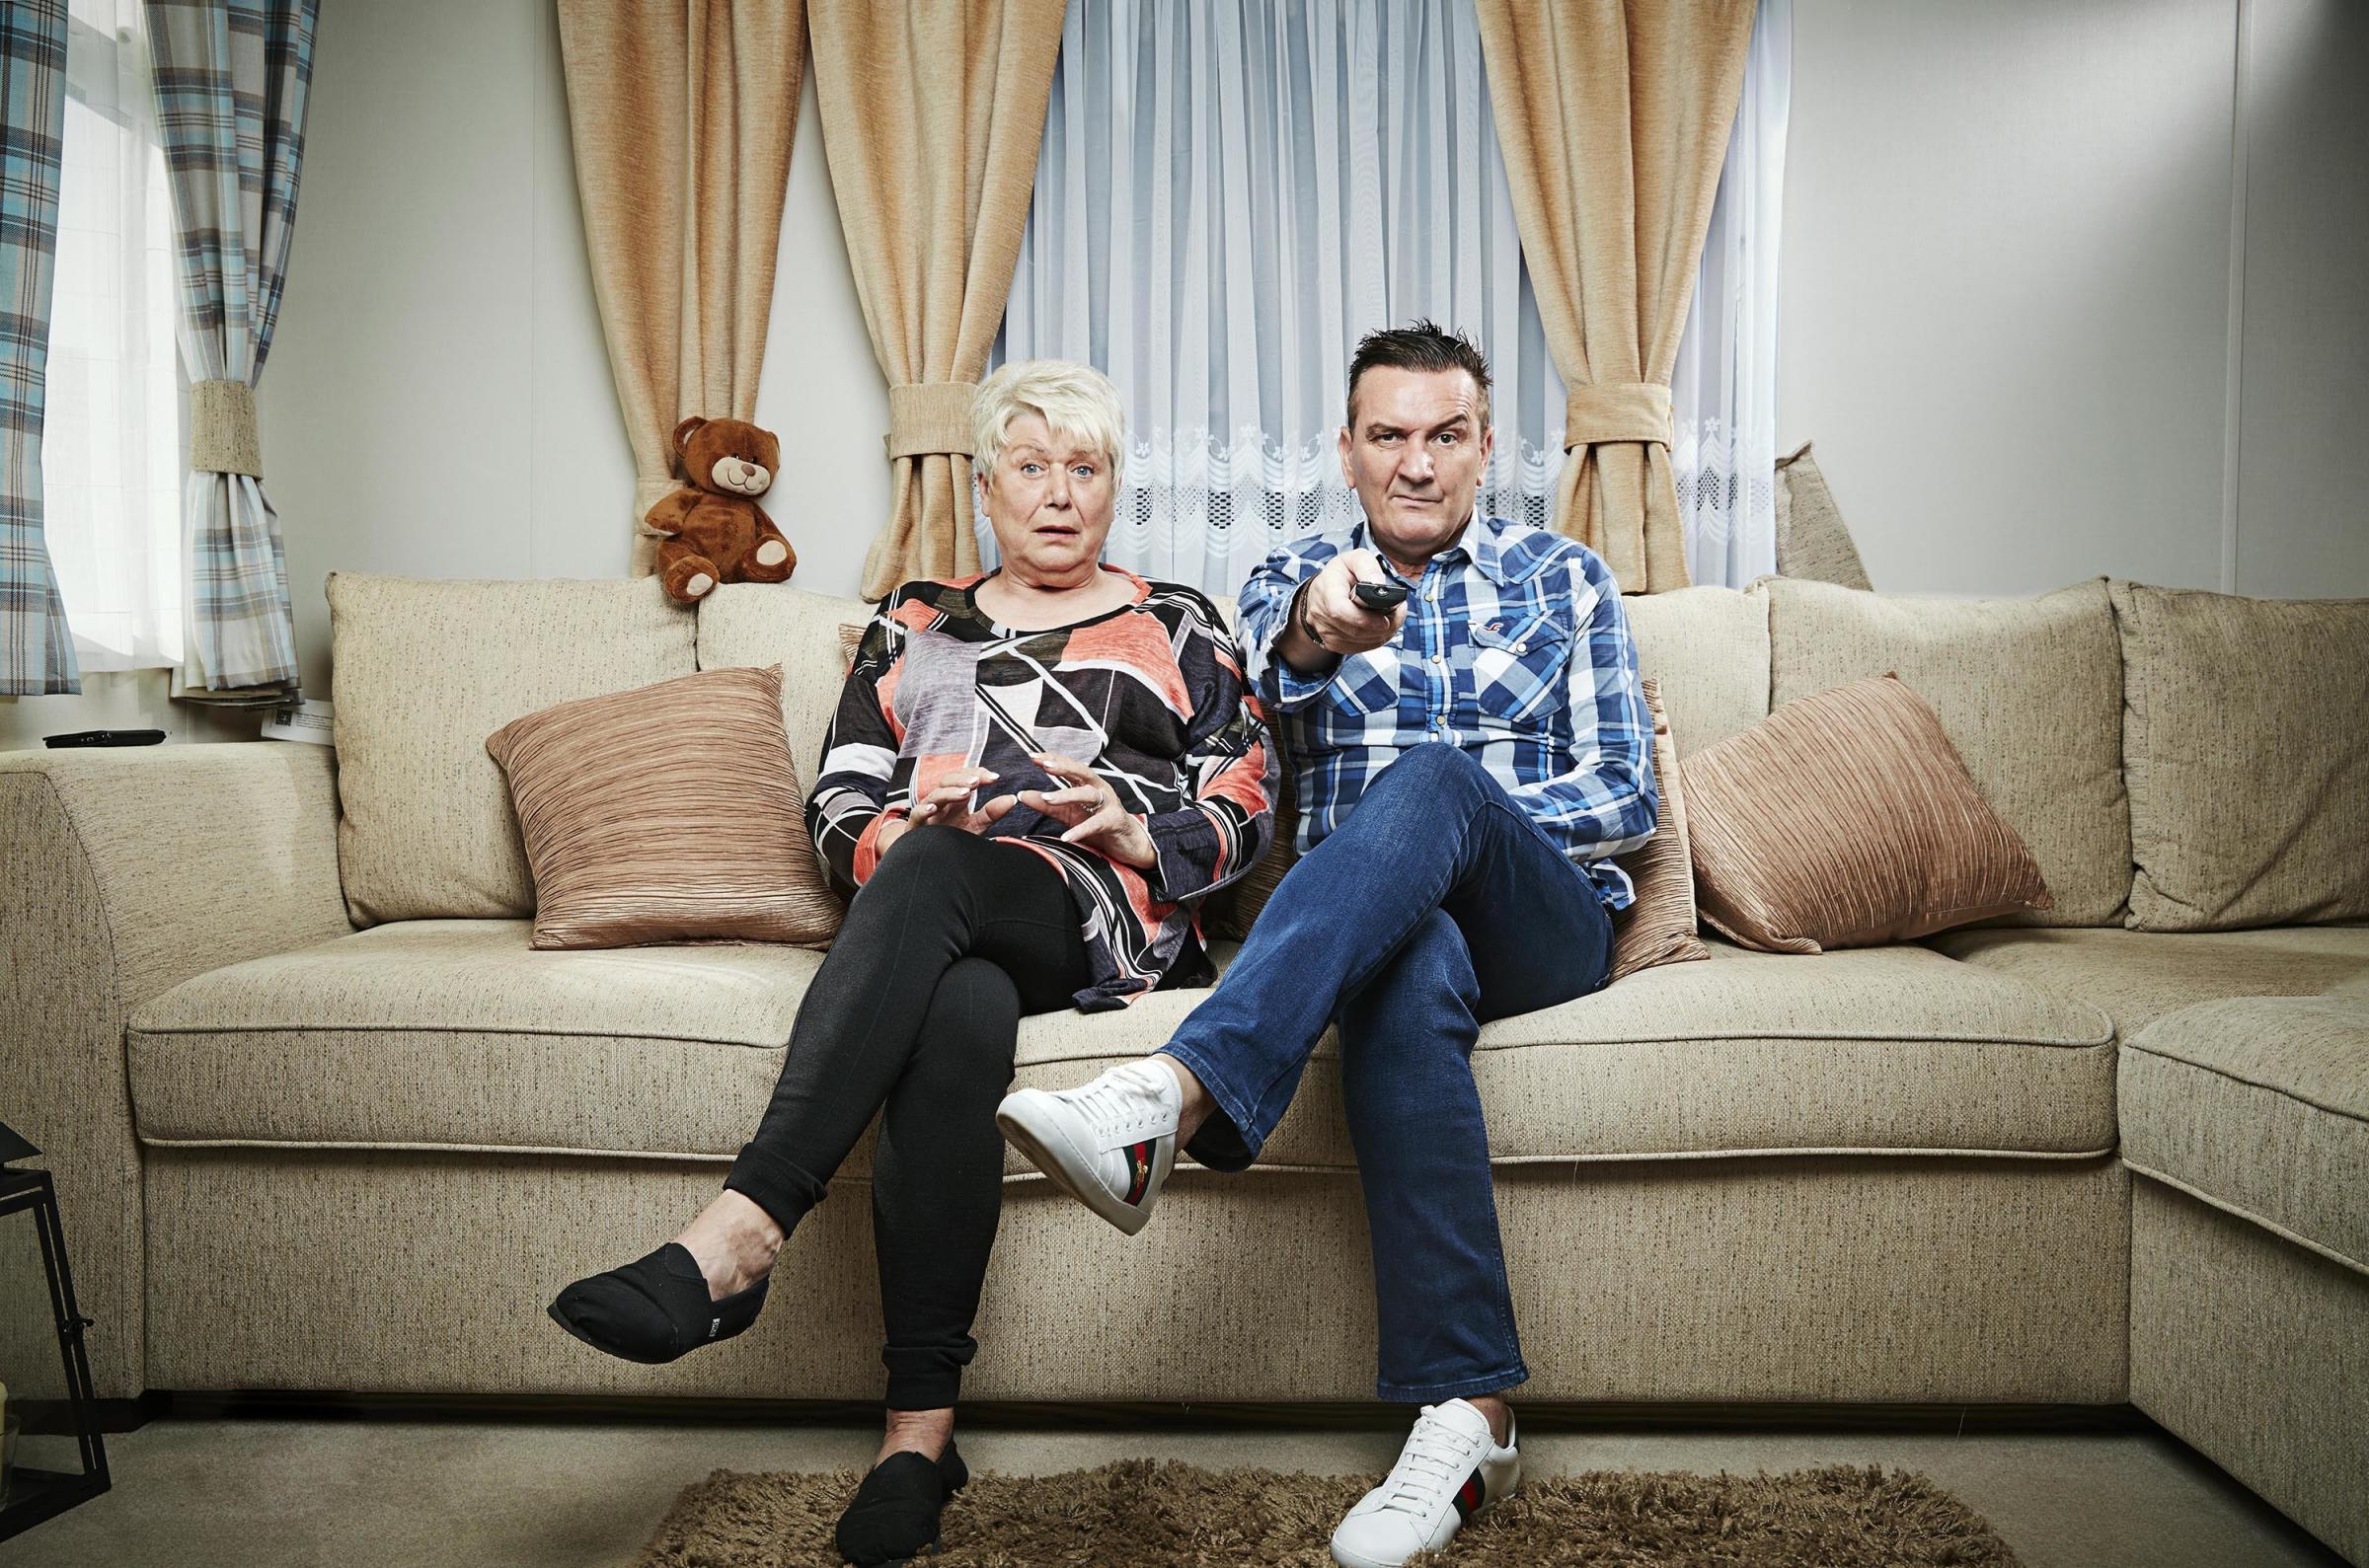 Gogglebox back for another series